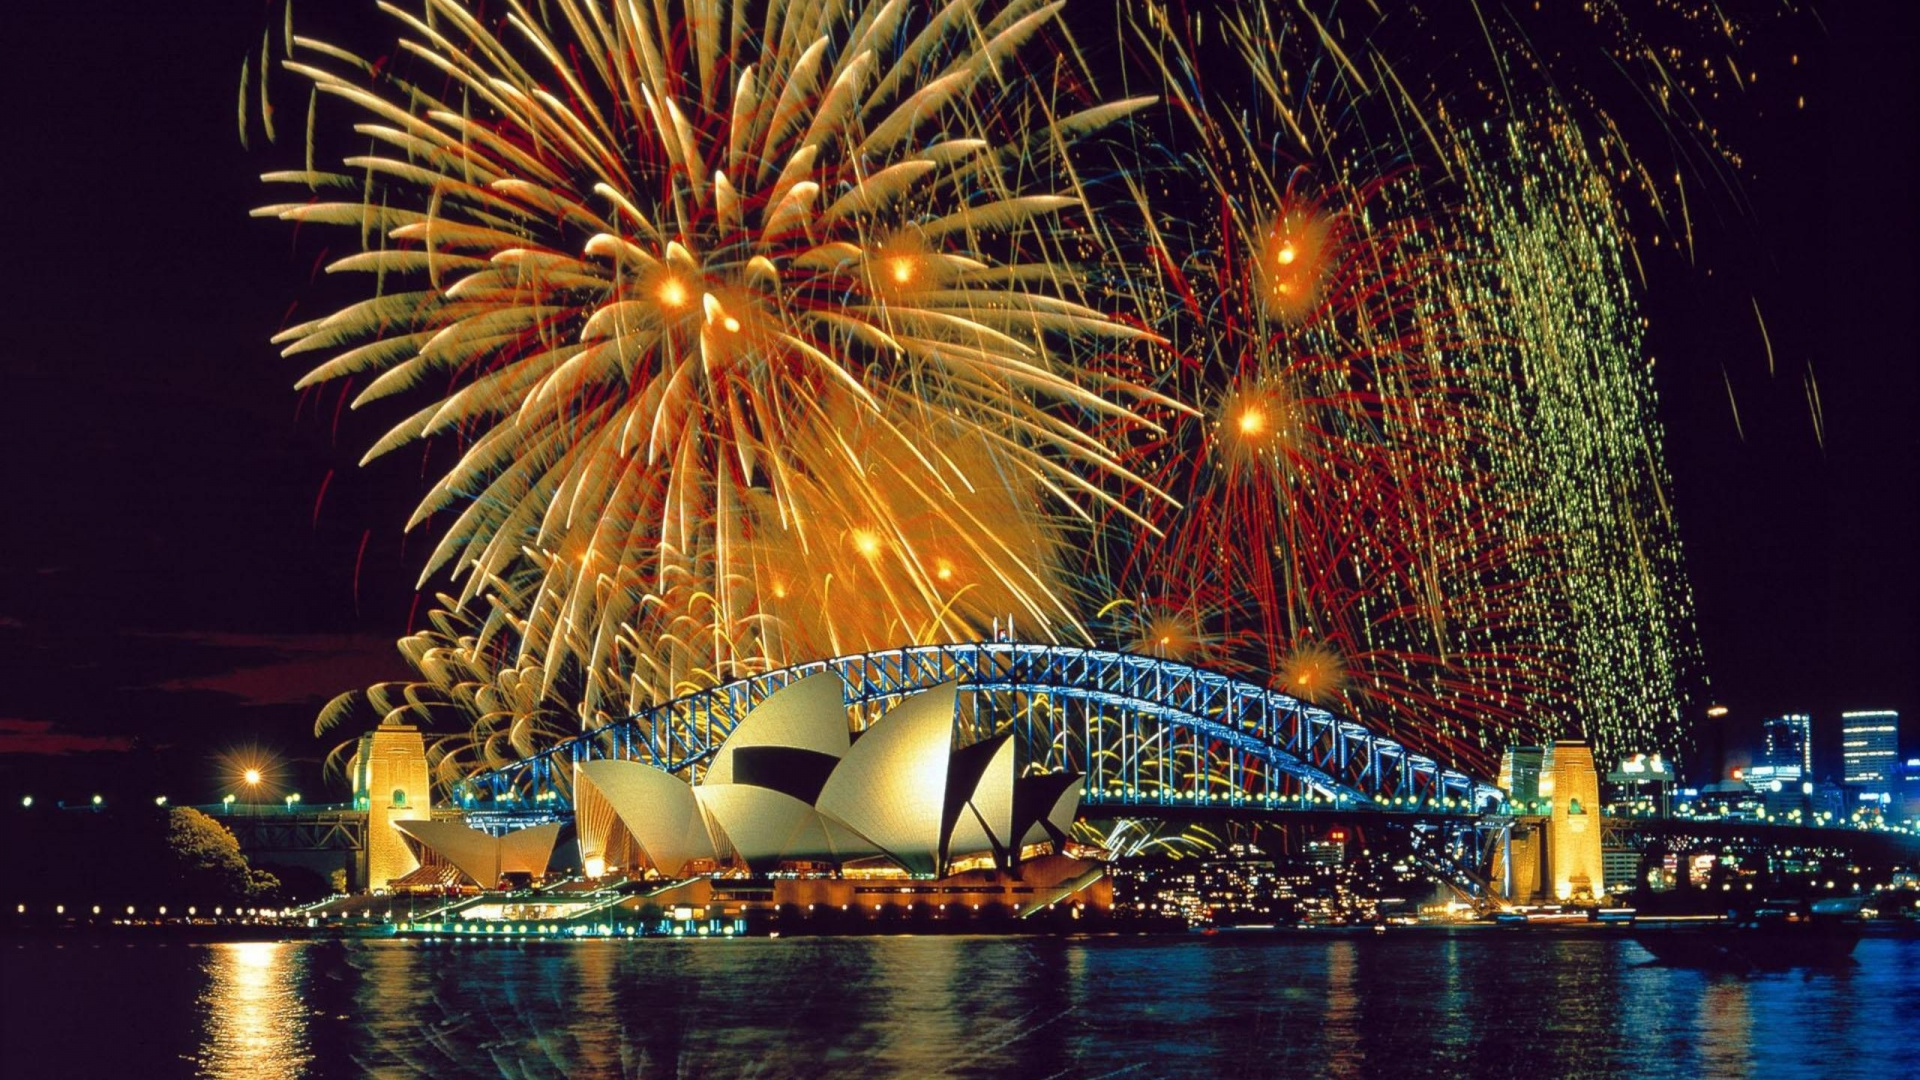 Fireworks Display Over Sydney Opera House. Wallpaper in 1920x1080 Resolution